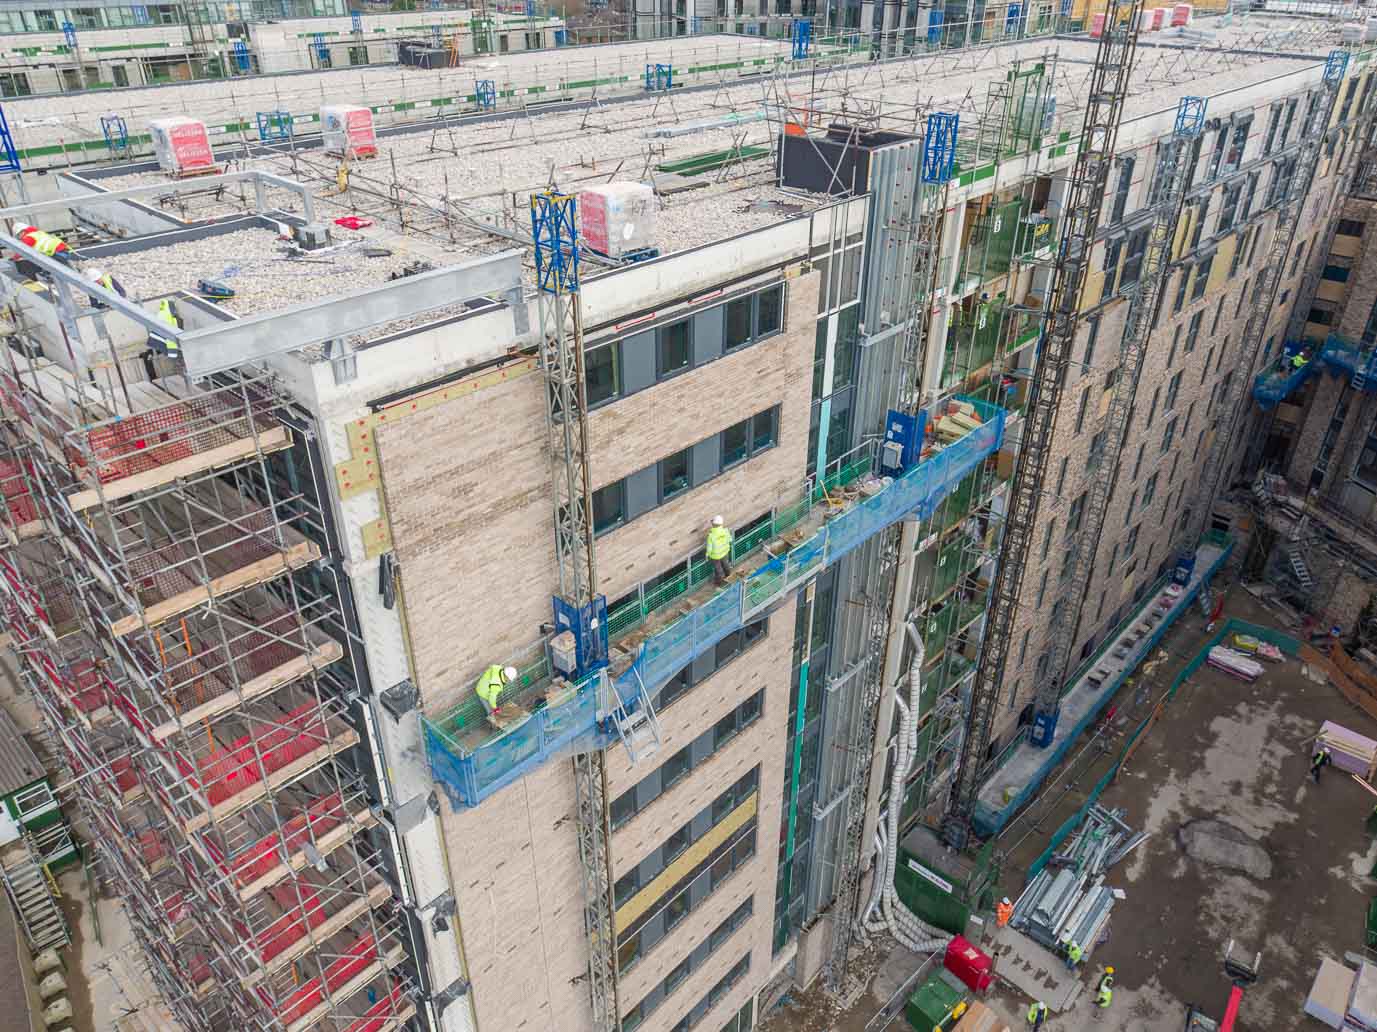 Aerial drone photography of works progress at Clippers Quay construction development, Salford